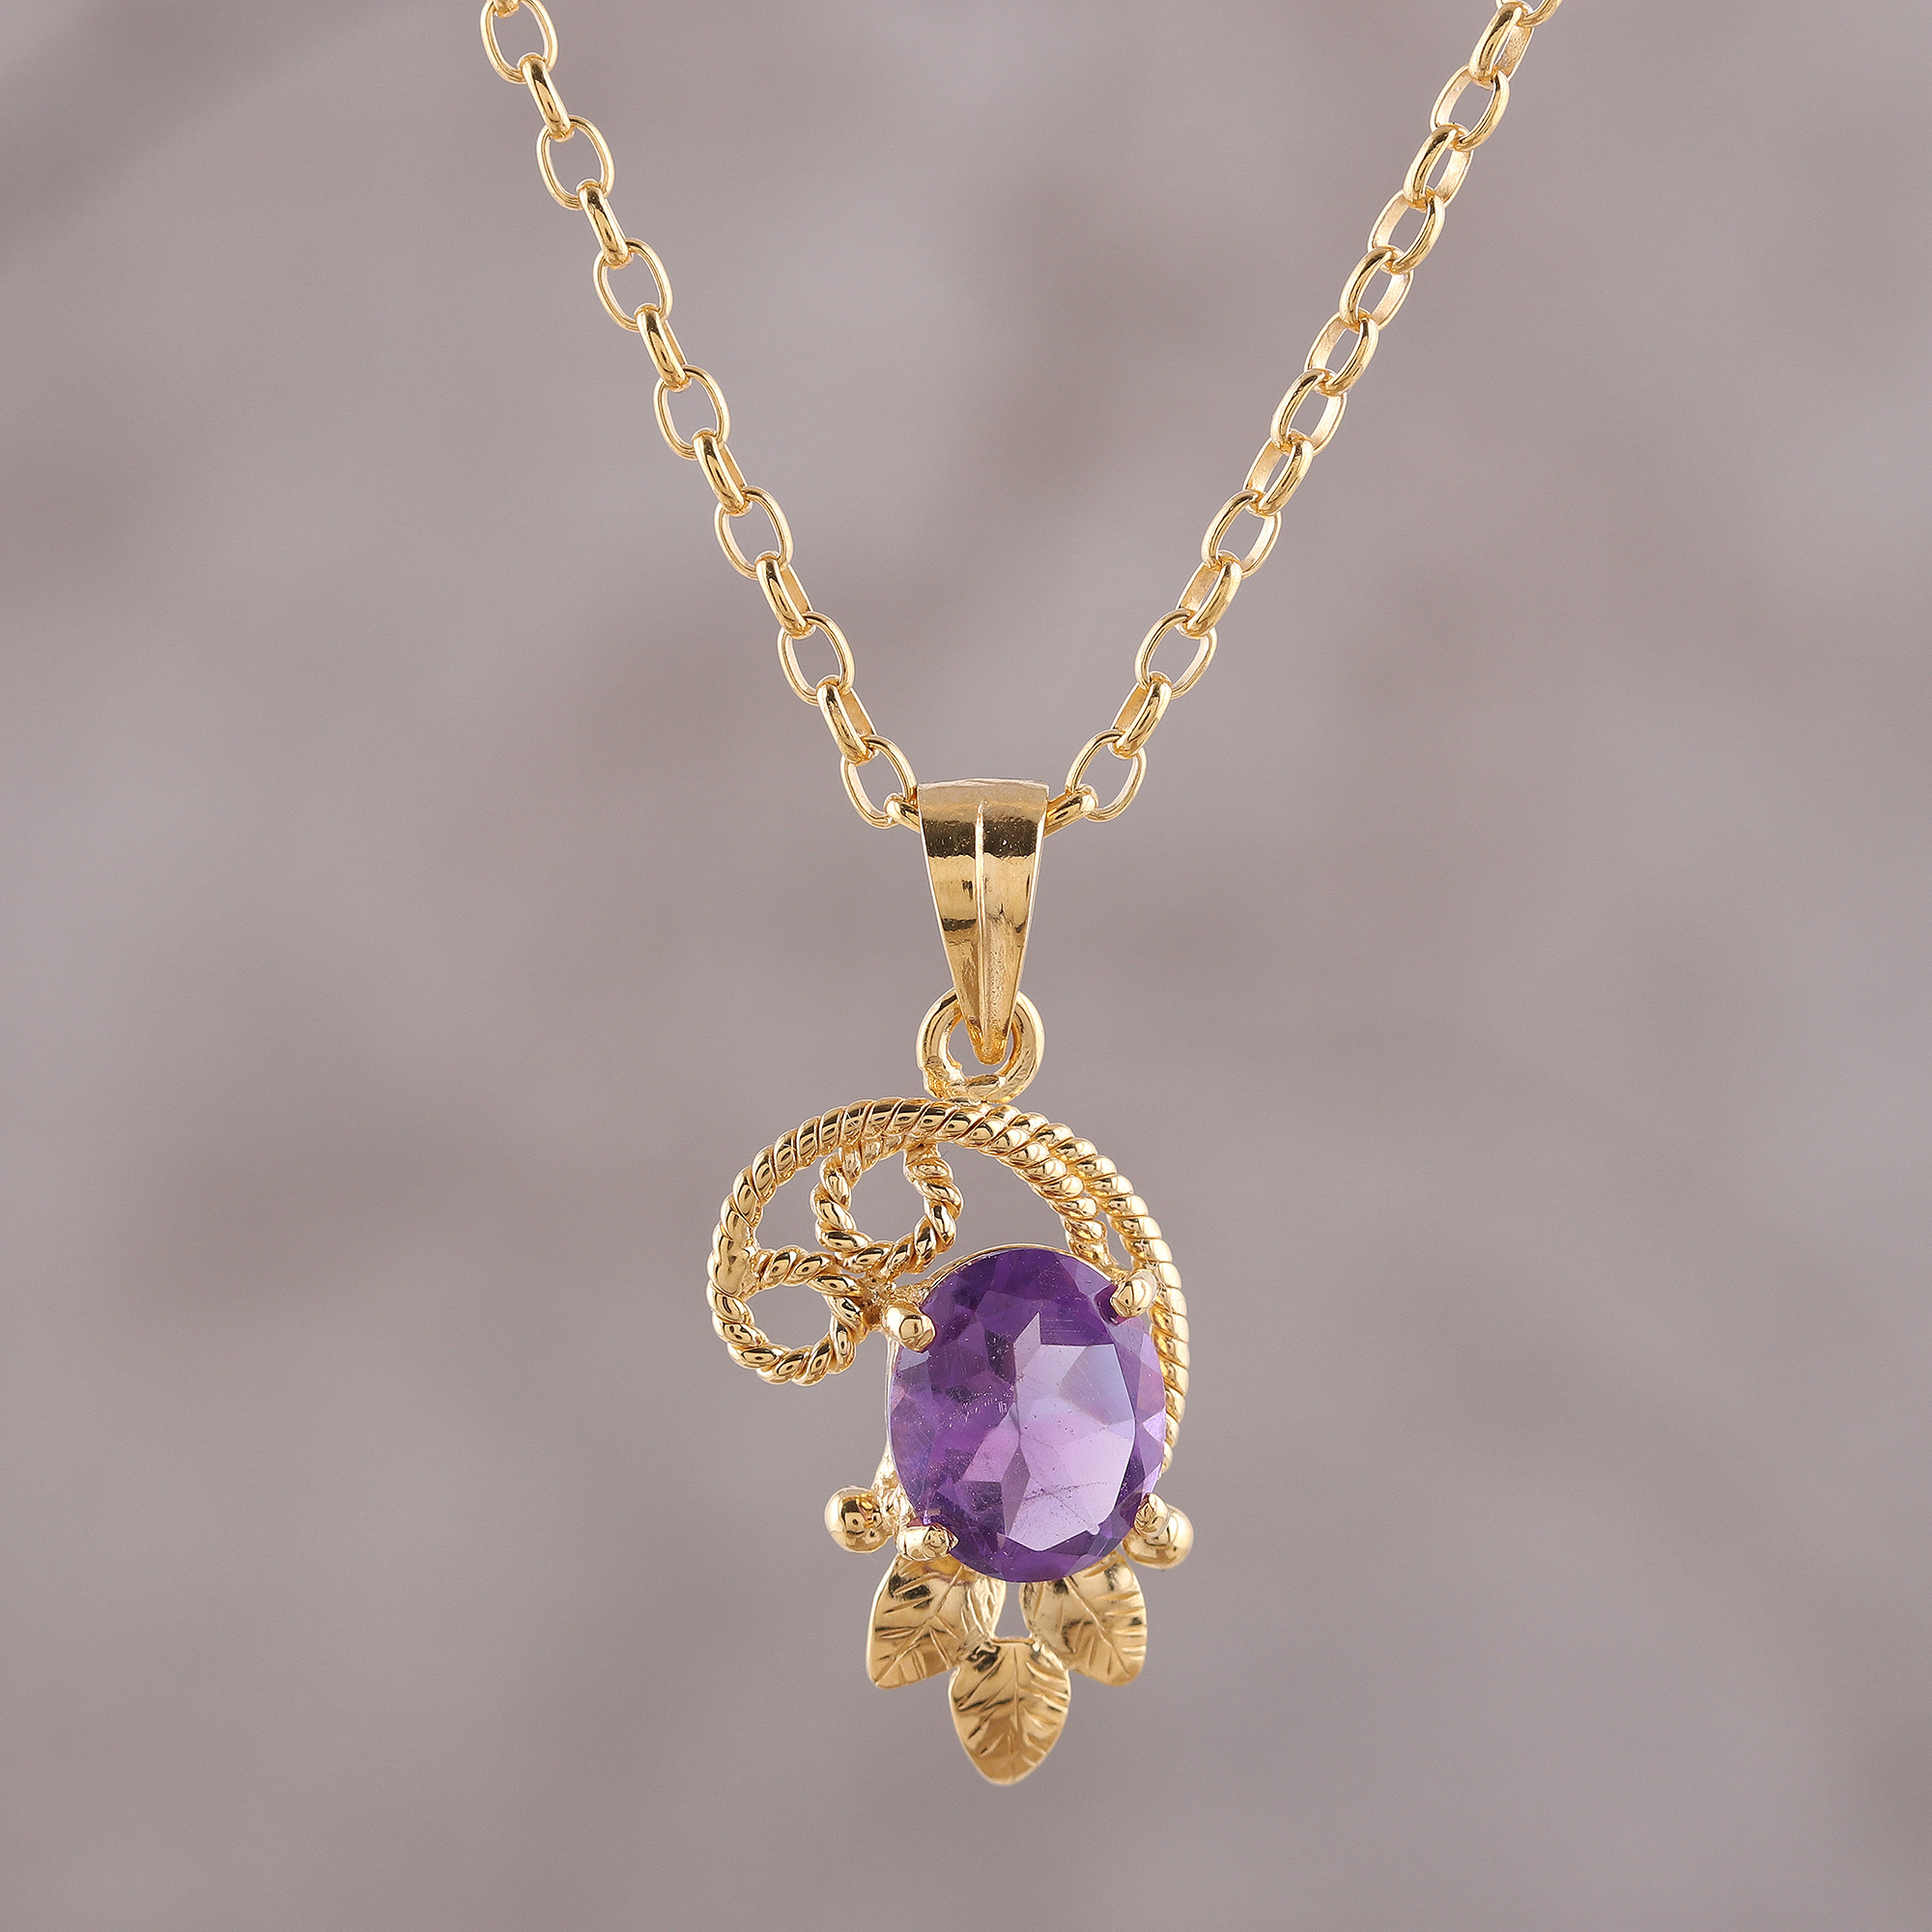 22K Gold plated 925 Sterling Silver Chain Necklace with Amethyst Quartz Round Bezel Gemstone